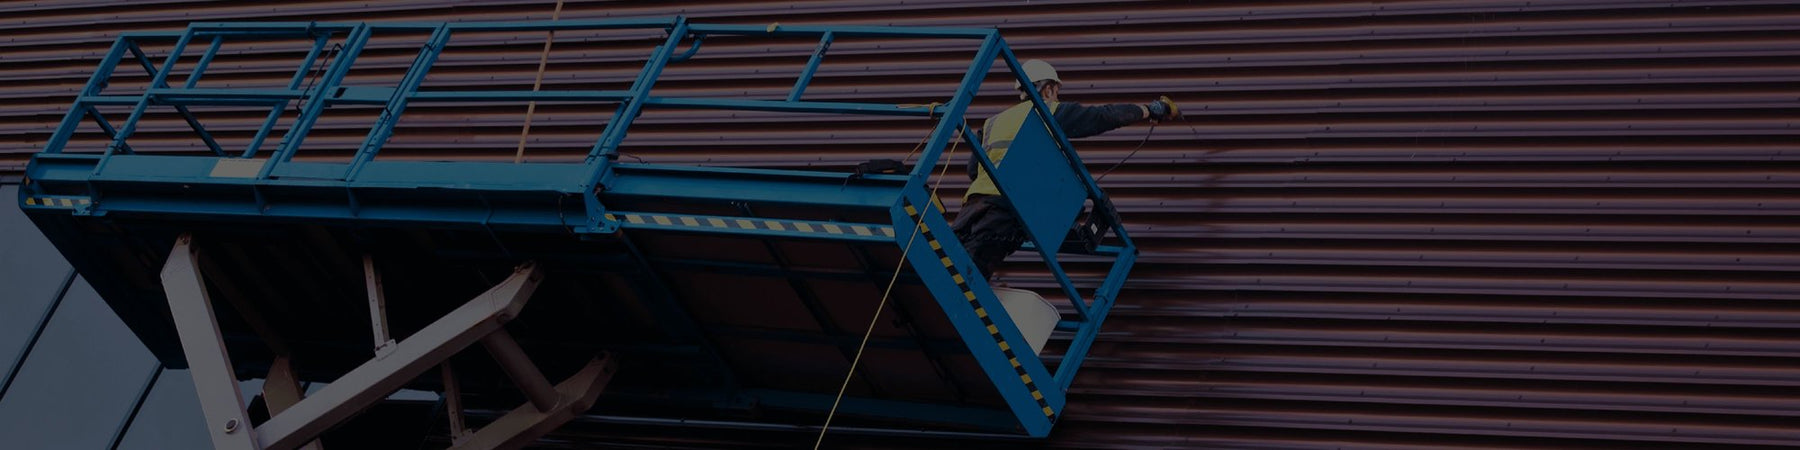 Best Practices for Scissor Lift Safety